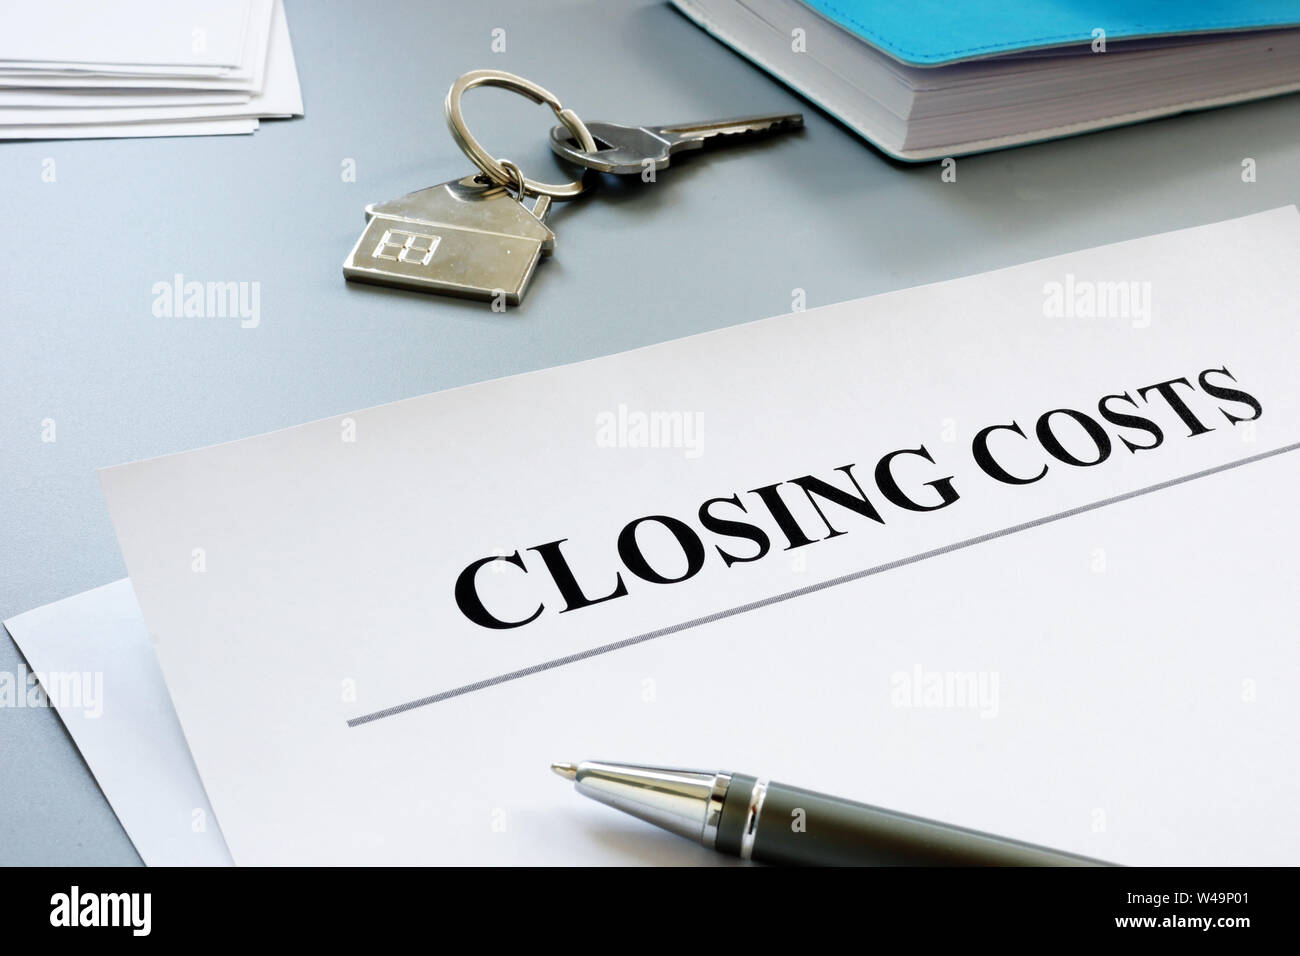 Documents for closing costs and keys. Stock Photo